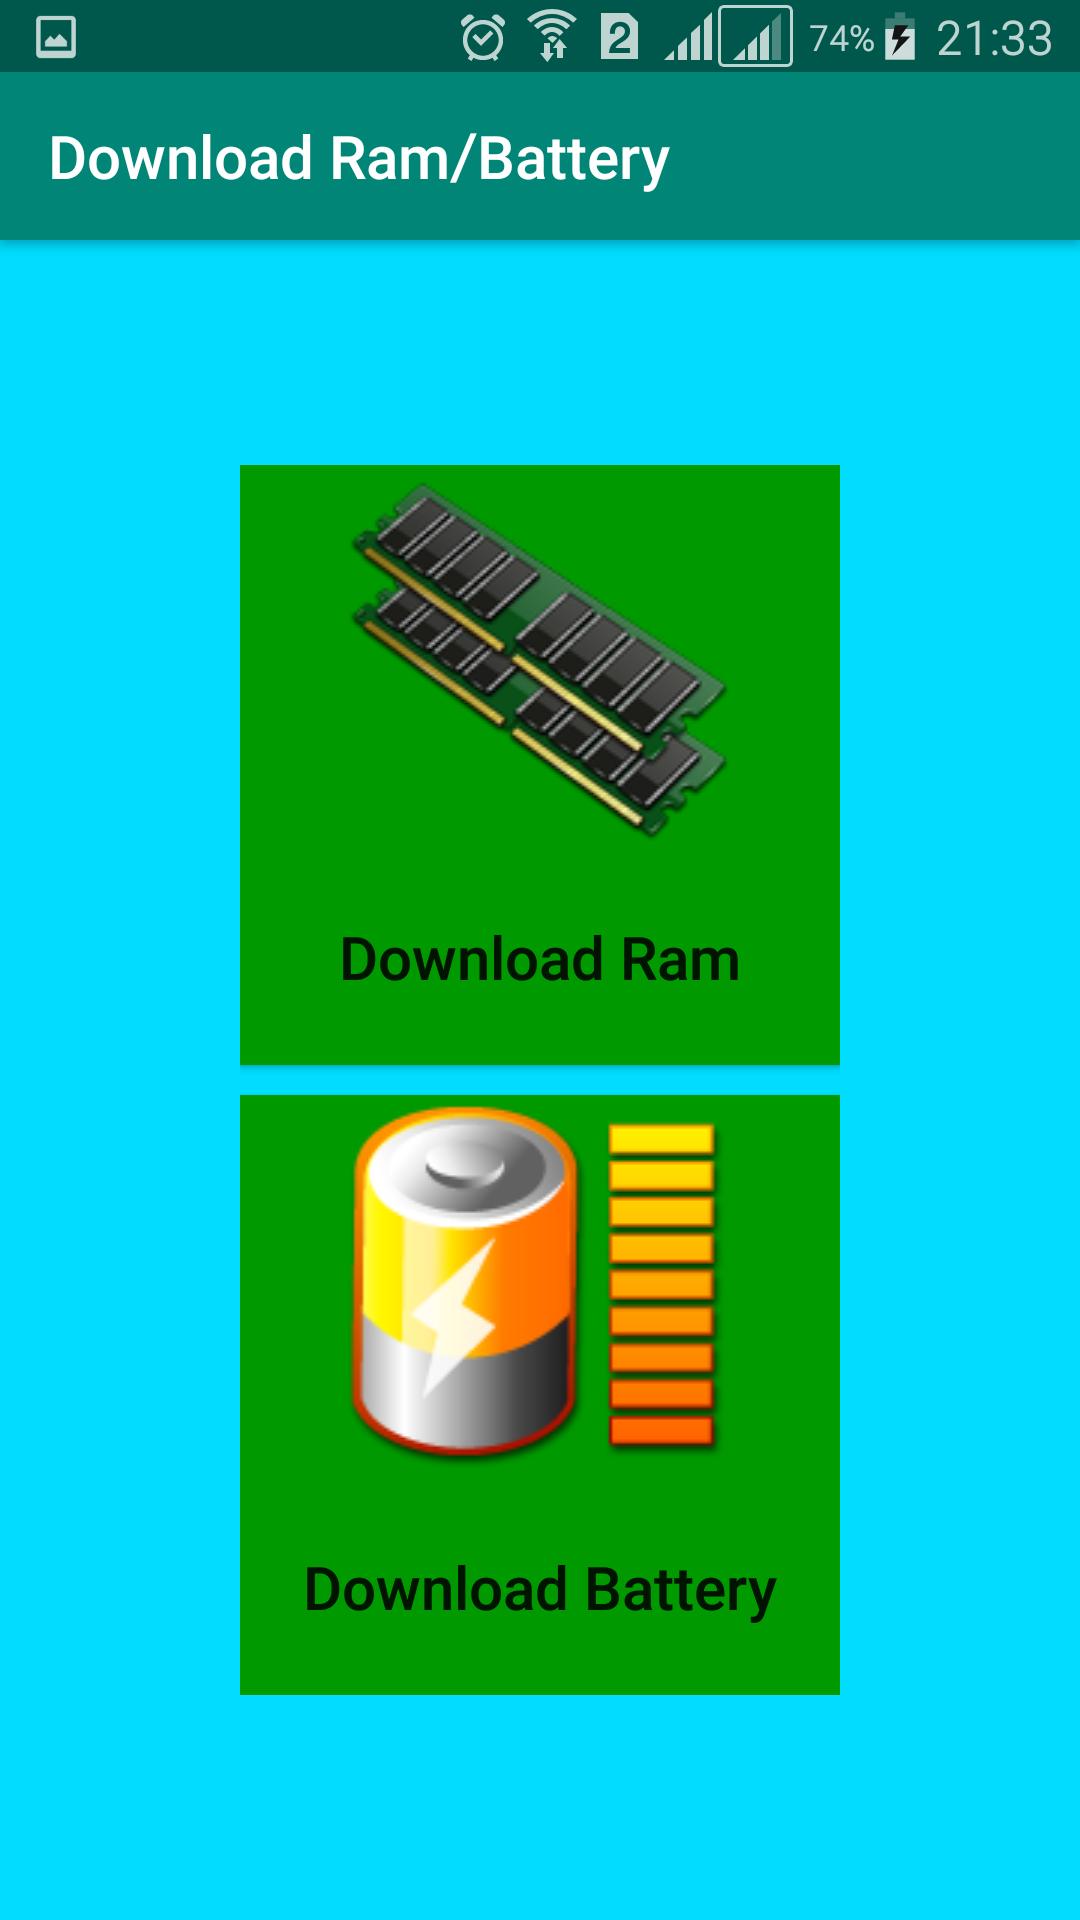 Download More Ram And Battery for Android - APK Download